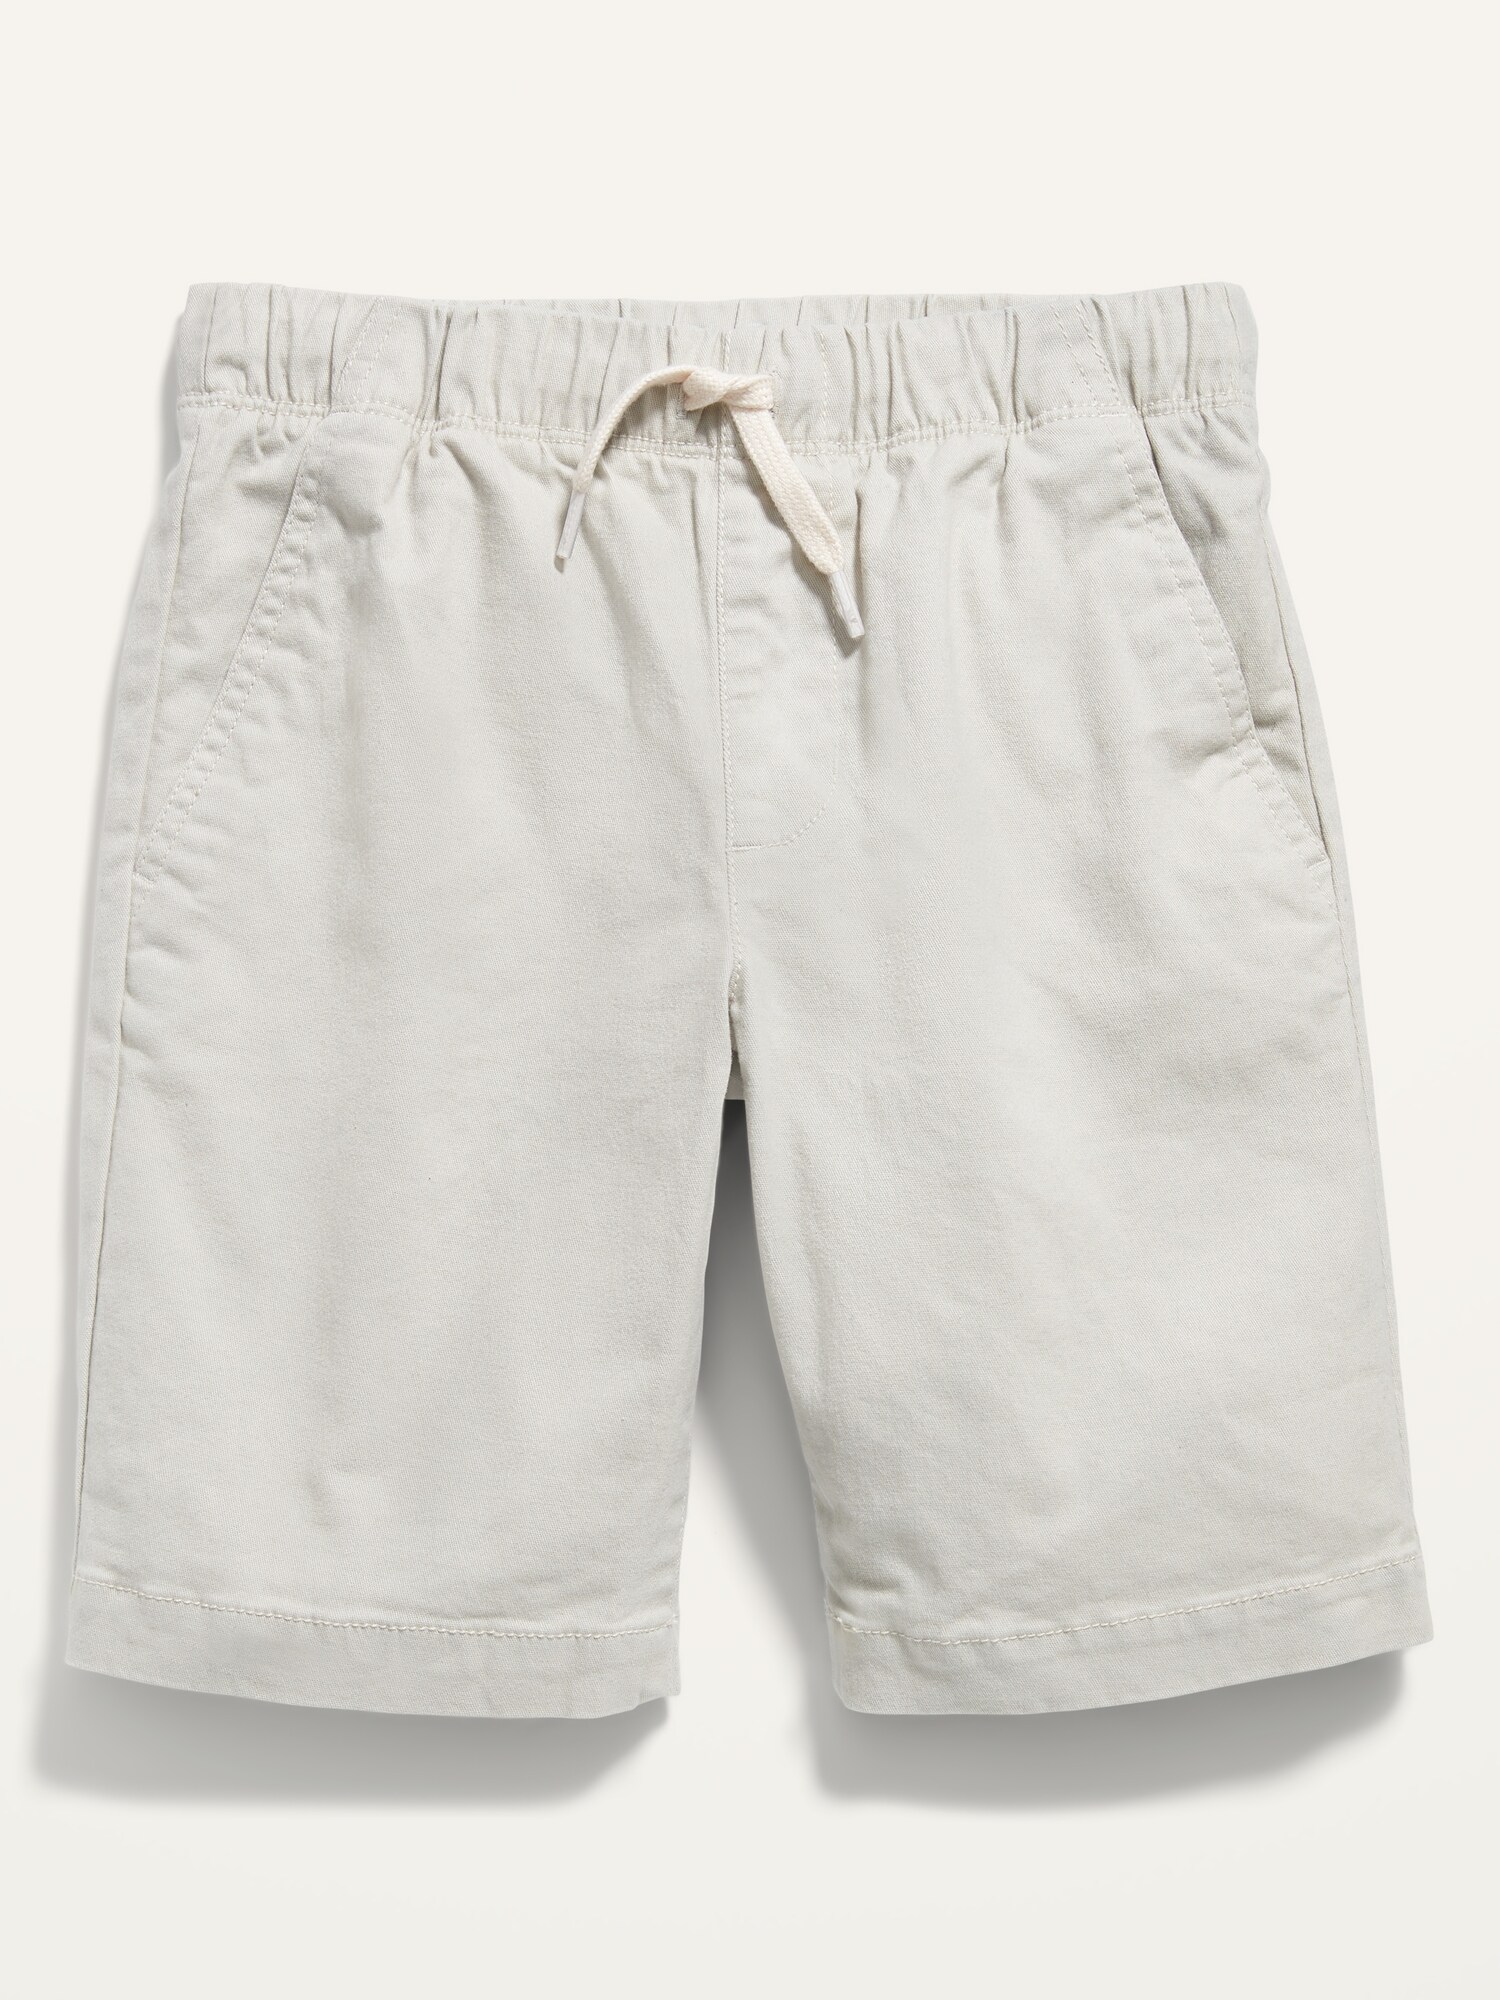 *Today Only Deal* Built-In Flex Flat-Front Jogger Shorts for Boys